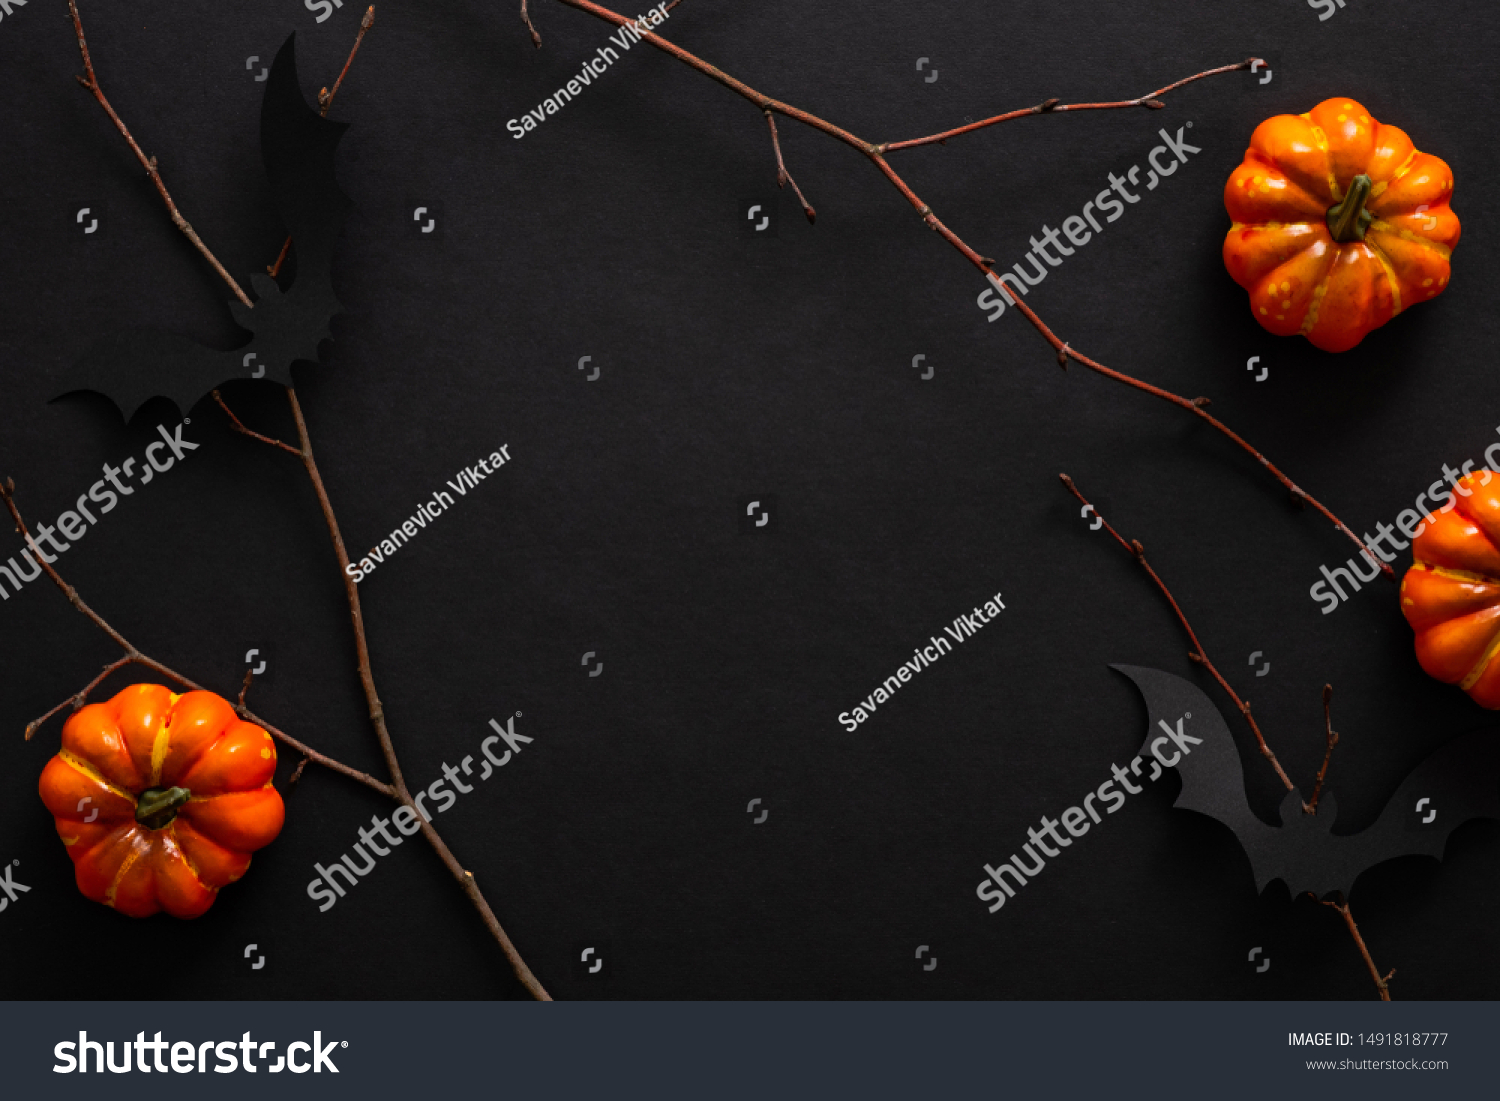 Modern Halloween background with pumpkins, bats, decorations. Halloween party invitation card mockup. Flat lay, top view, copy space. #1491818777